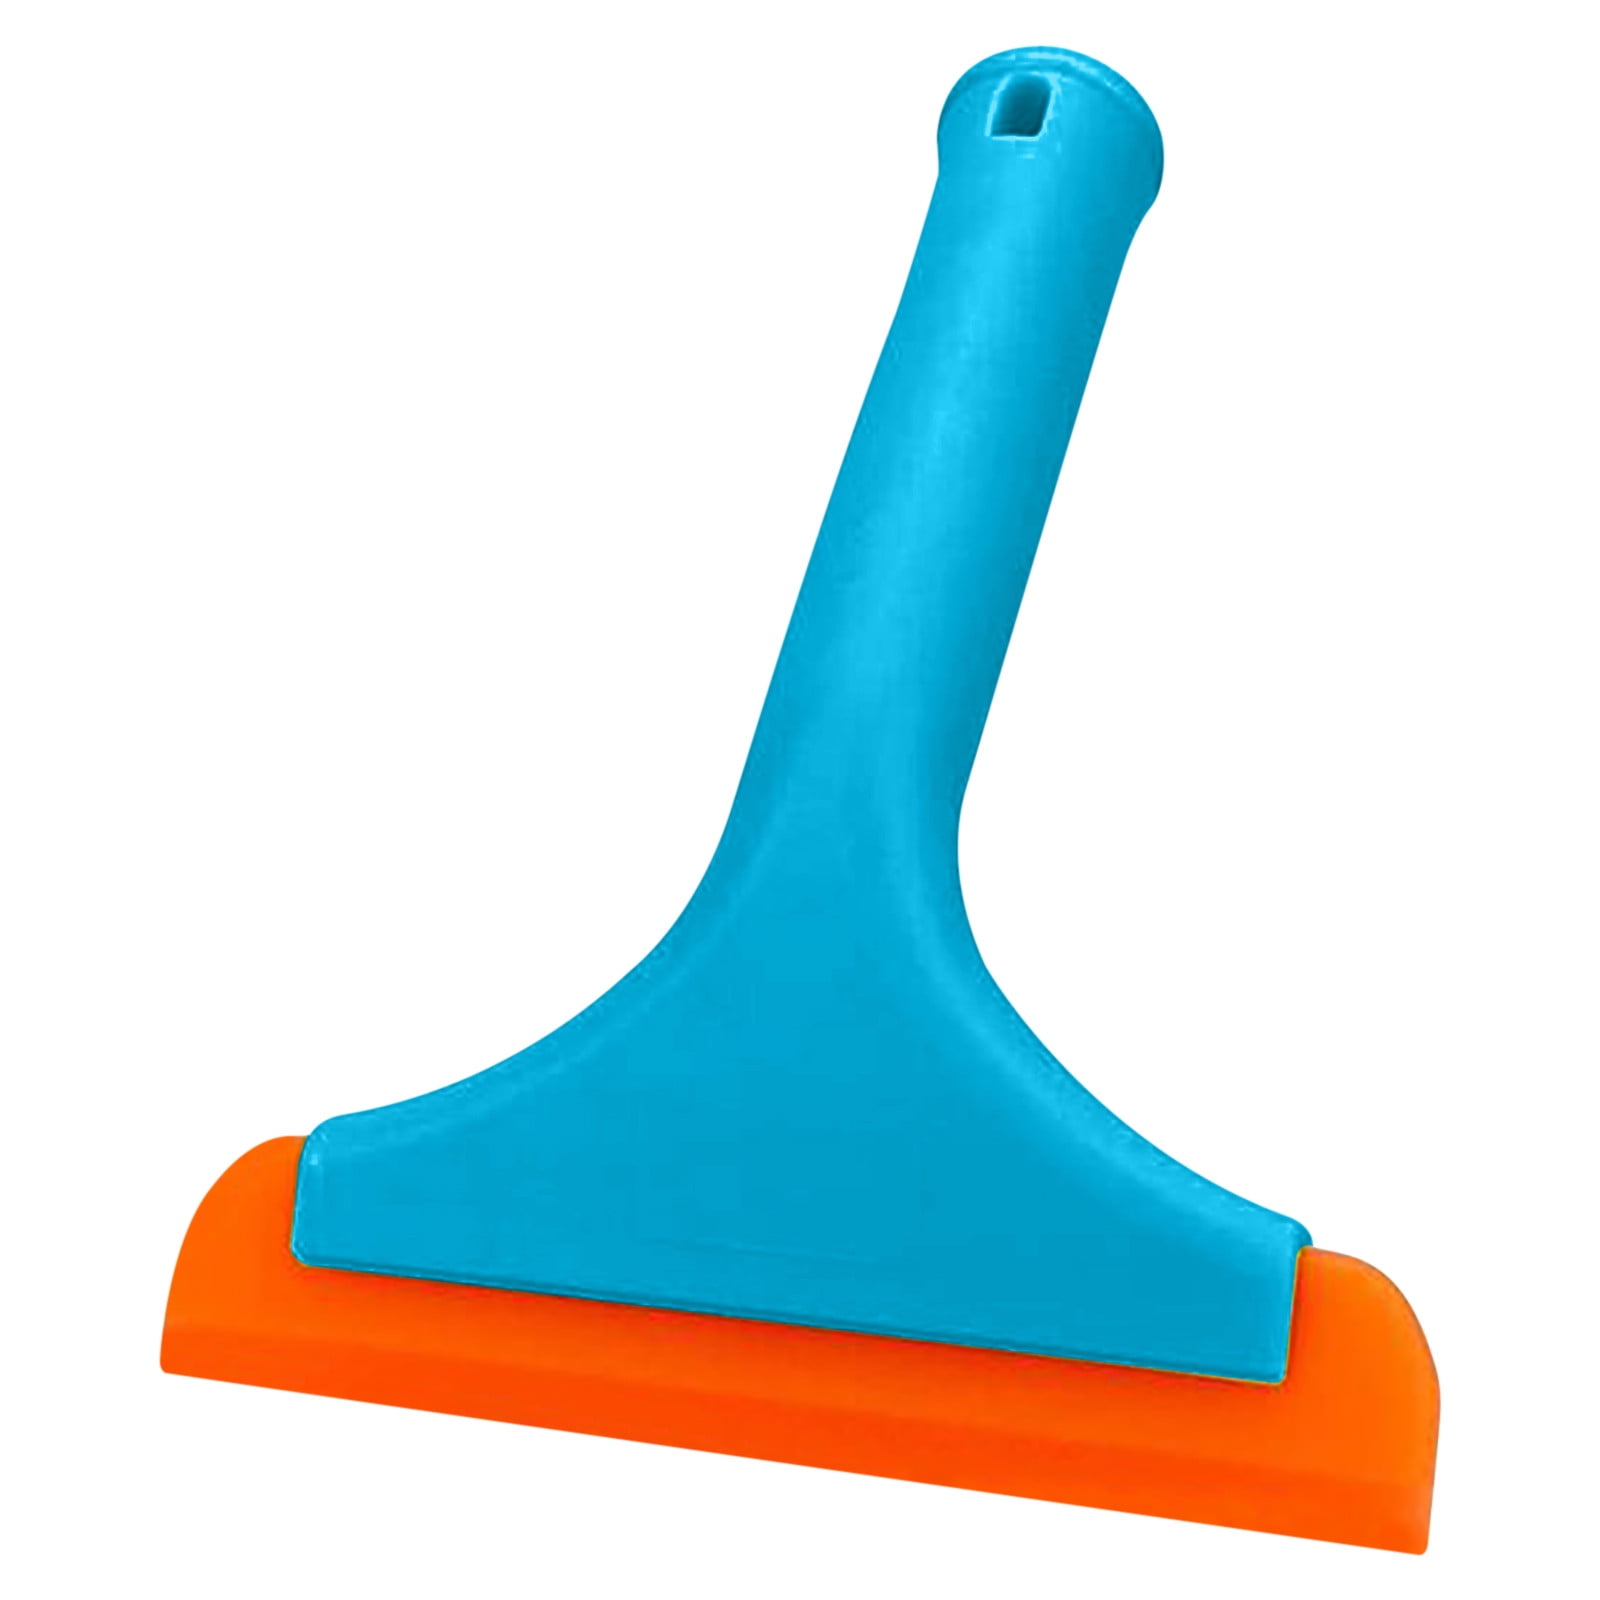 OAVQHLG3B Small Squeegees,Mini Silicone Squeegee for Windows